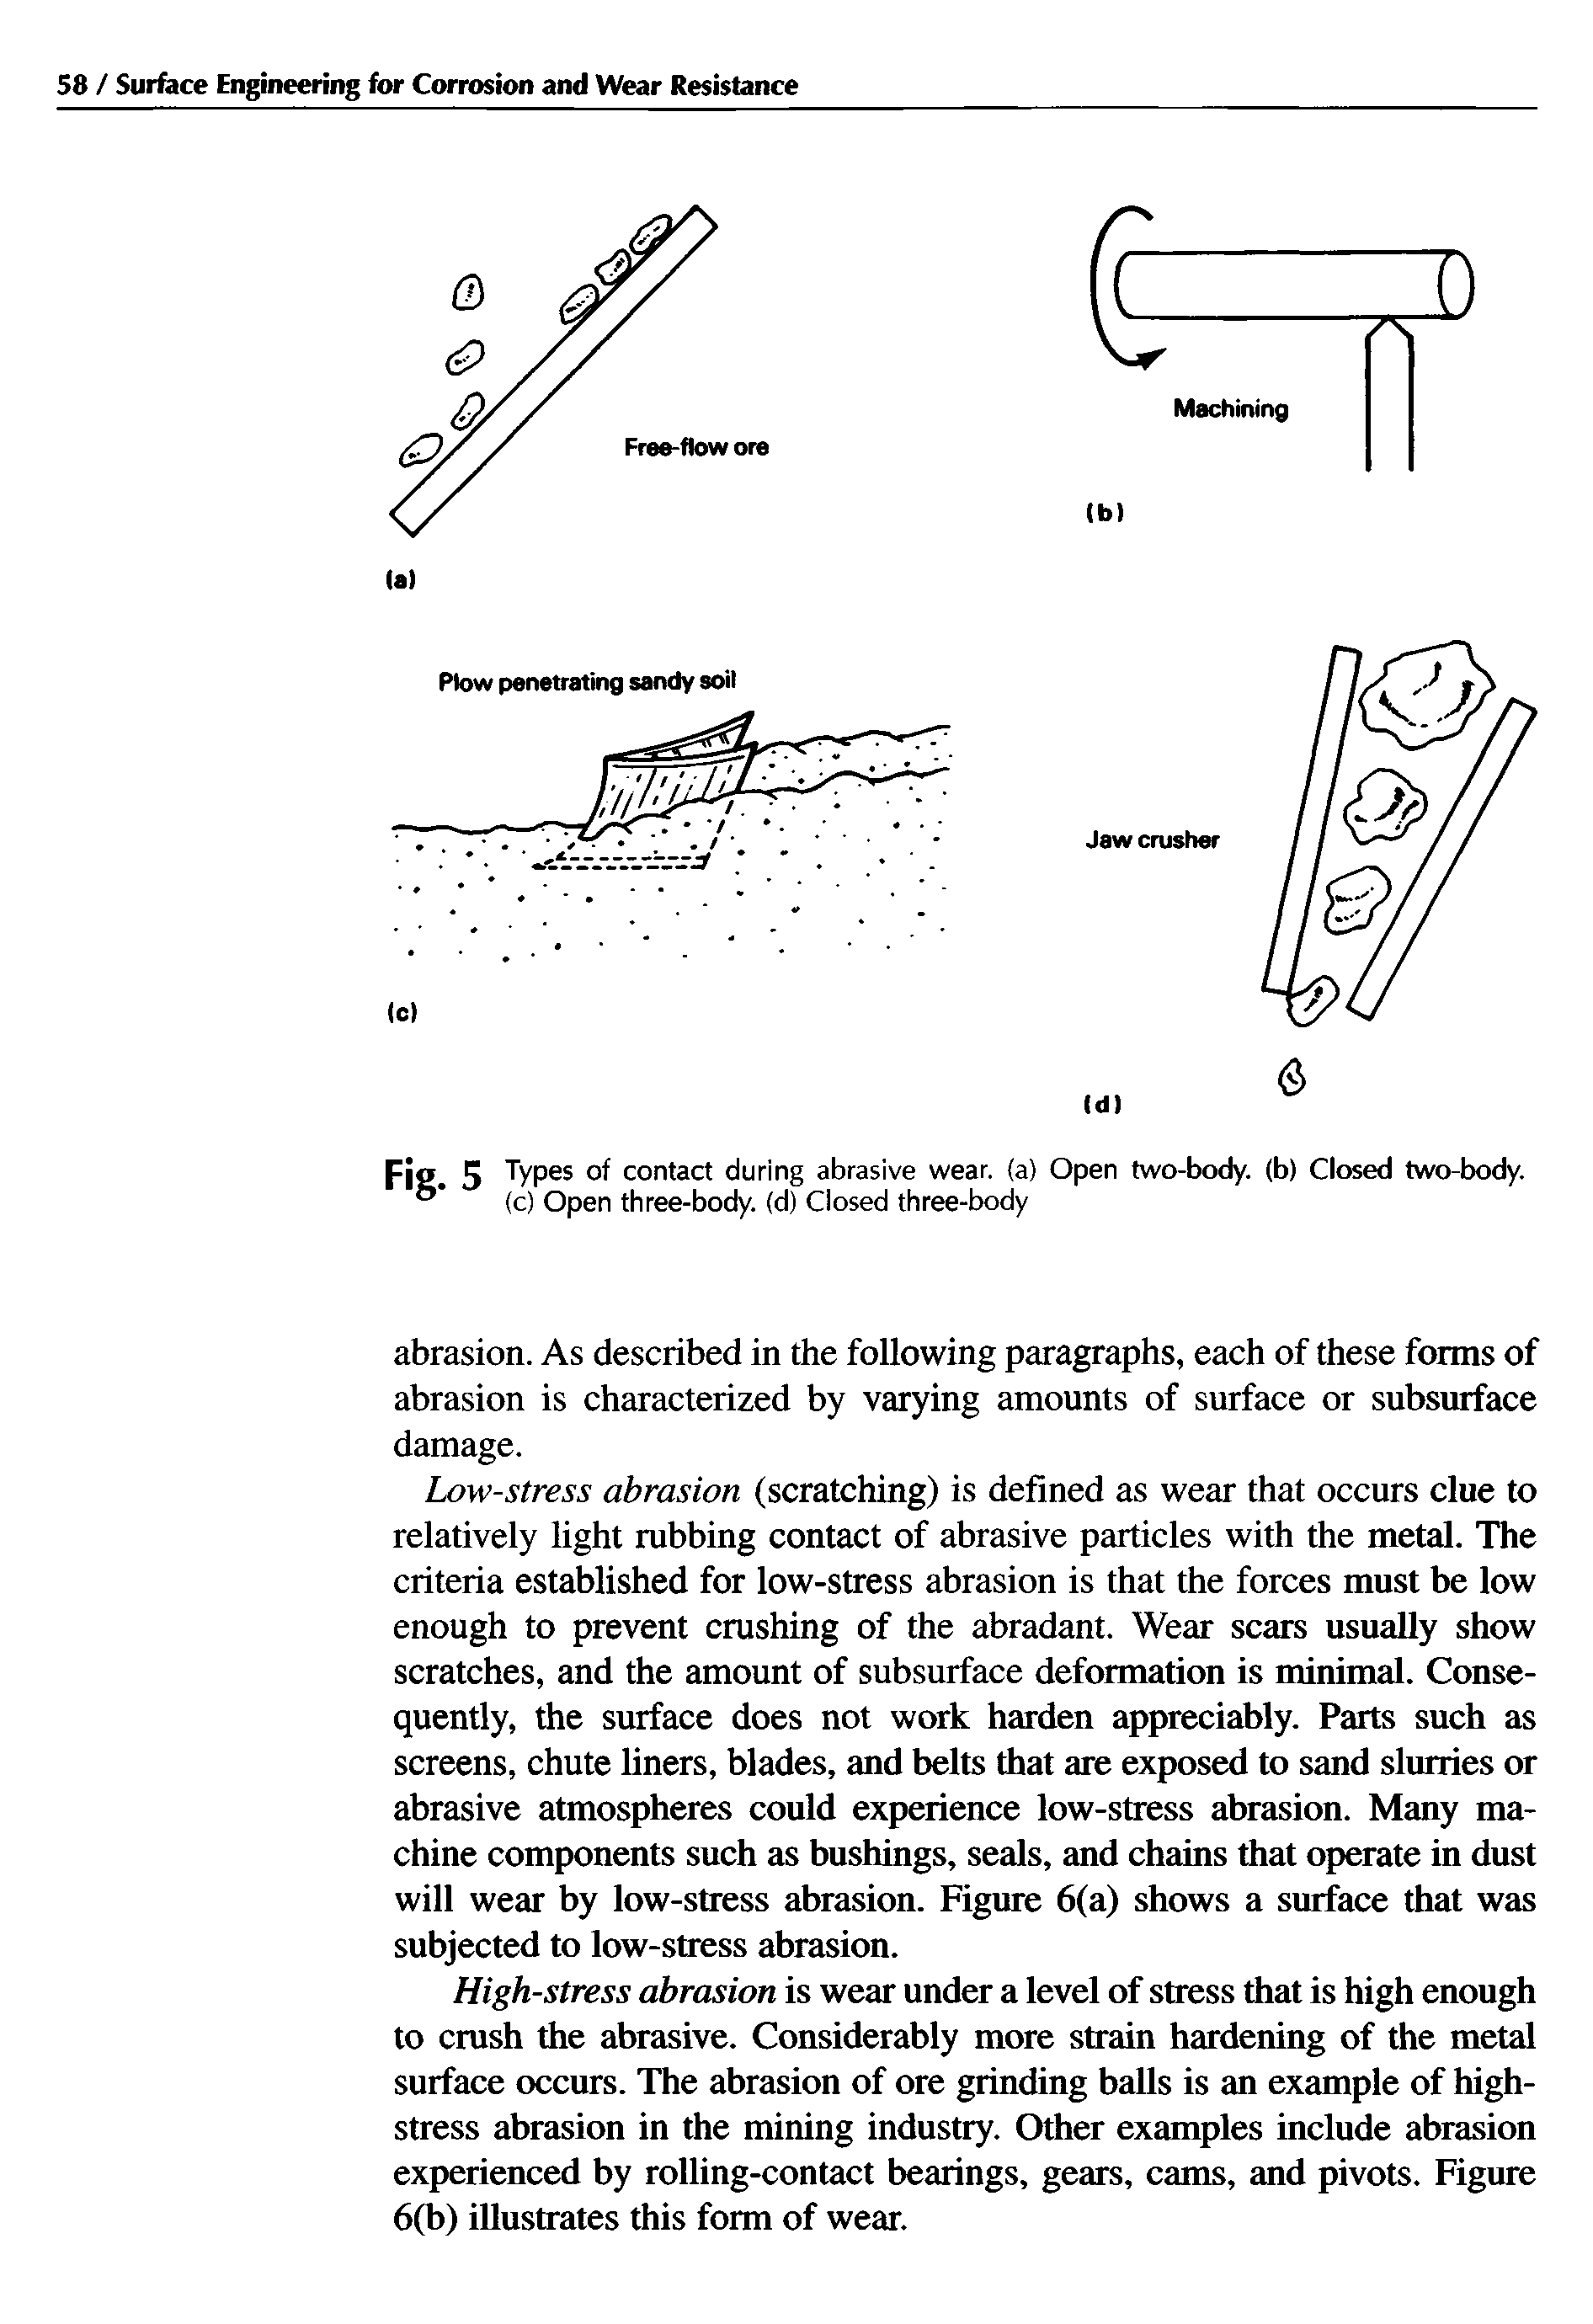 Fig. 5 Types of contact during abrasive wear, (a) Open two-body, (b) Closed two-body. (c) Open three-body, (d) Closed three-body...